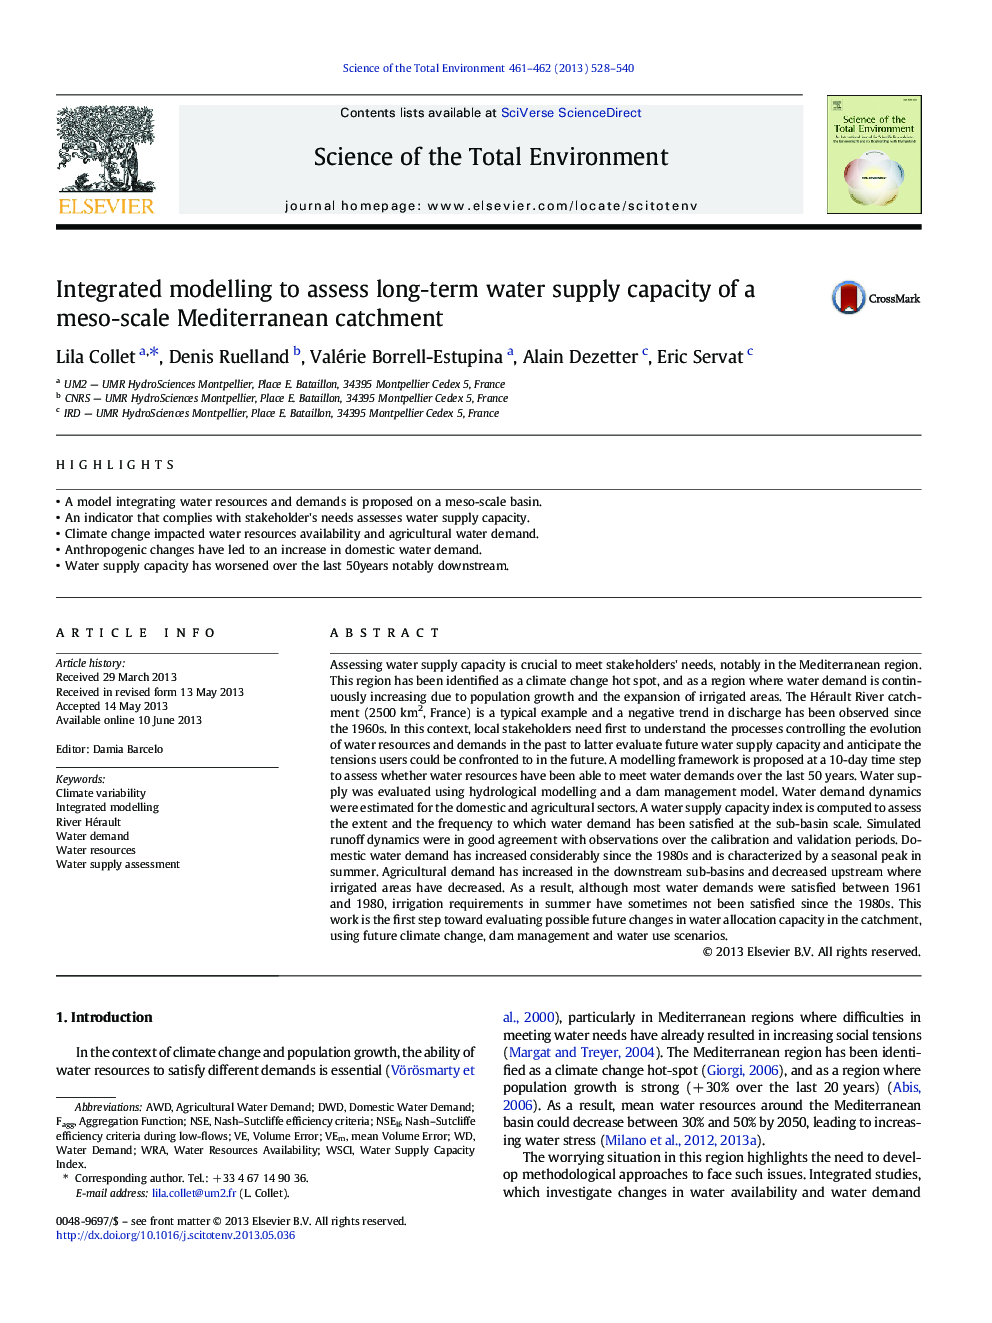 Integrated modelling to assess long-term water supply capacity of a meso-scale Mediterranean catchment